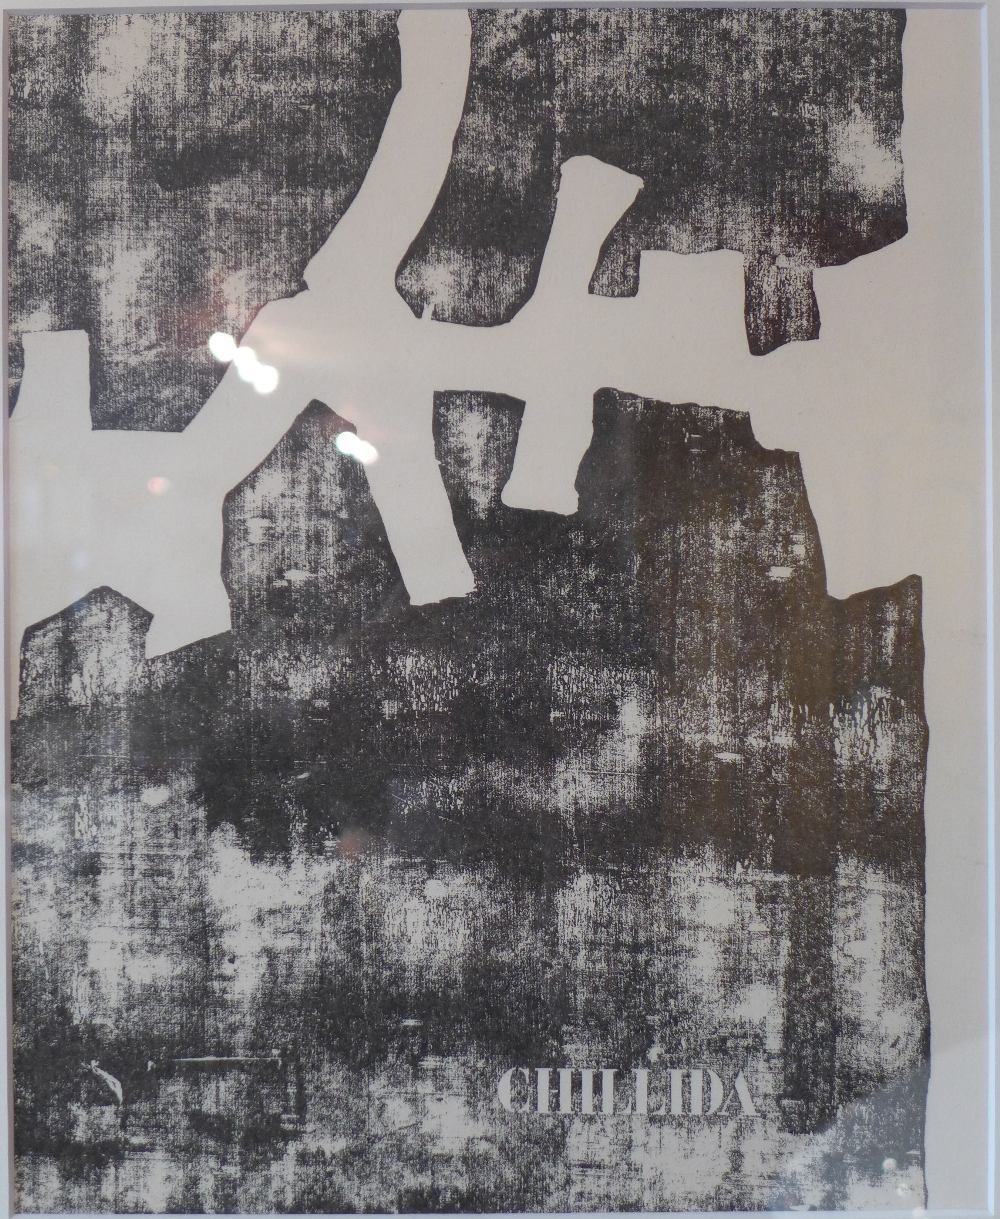 An Eduardo Chillida lithographic print after woodcut printed by Maeght glazed and framed